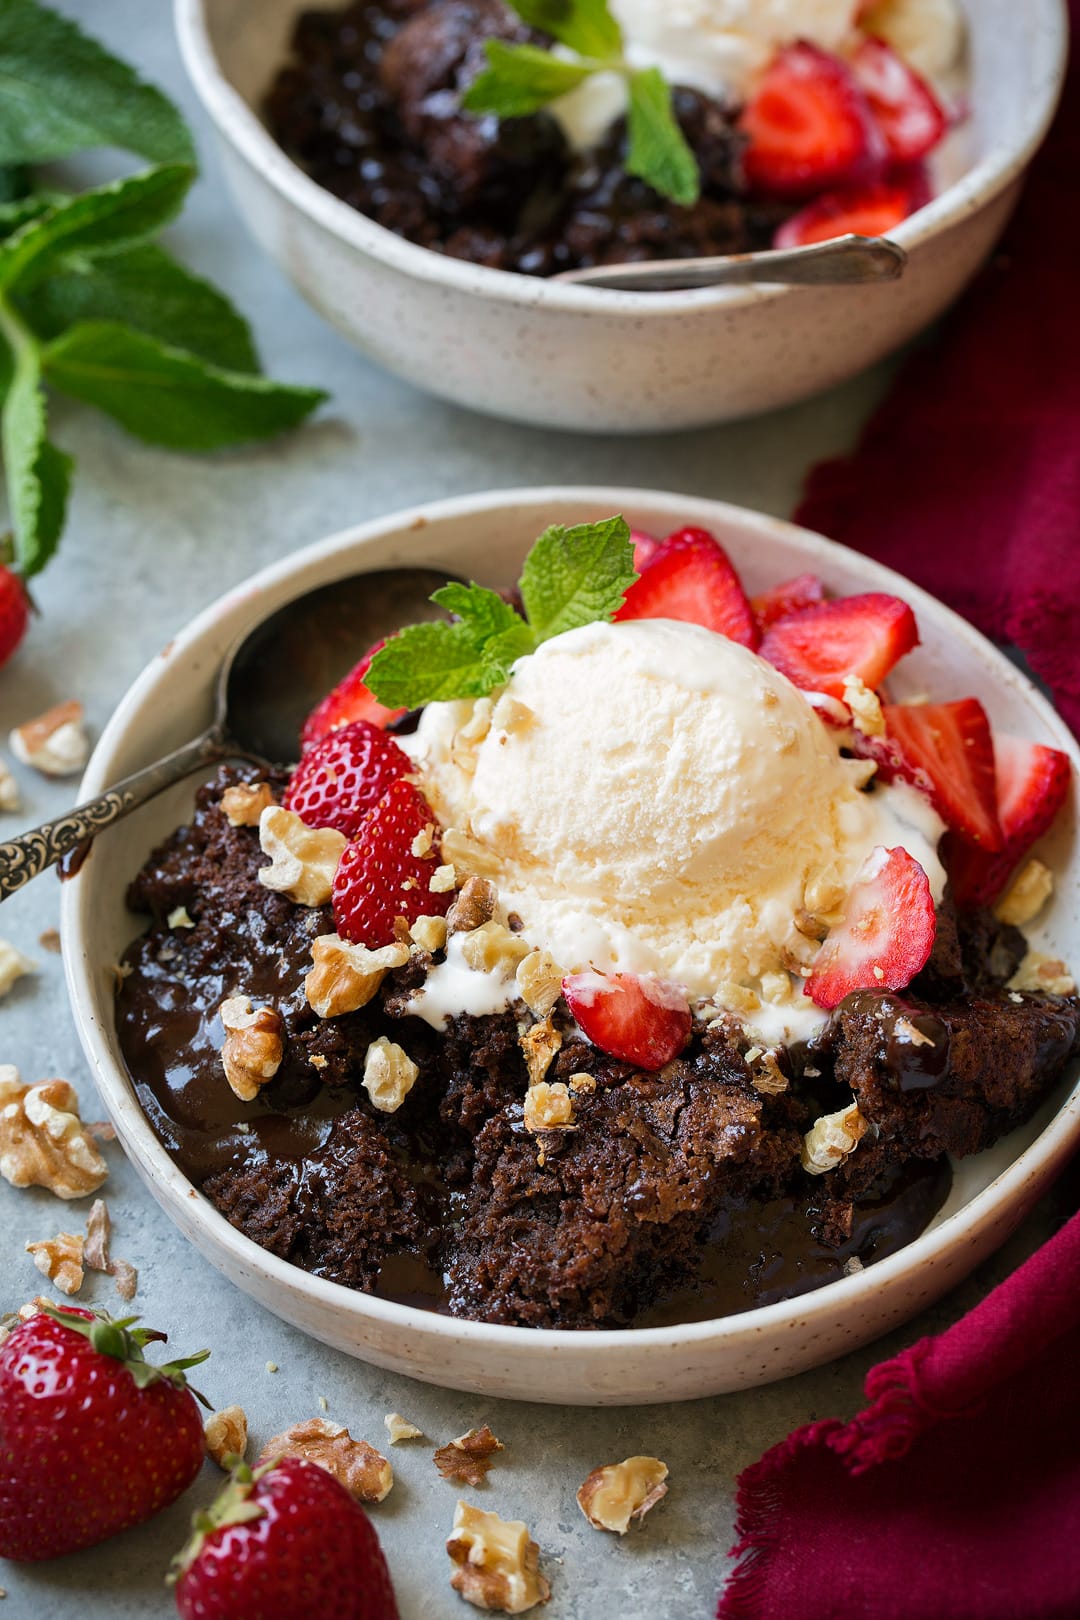 Chocolate cobbler in a white individual bowl topped with vanilla ice cream, strawberries and walnuts.